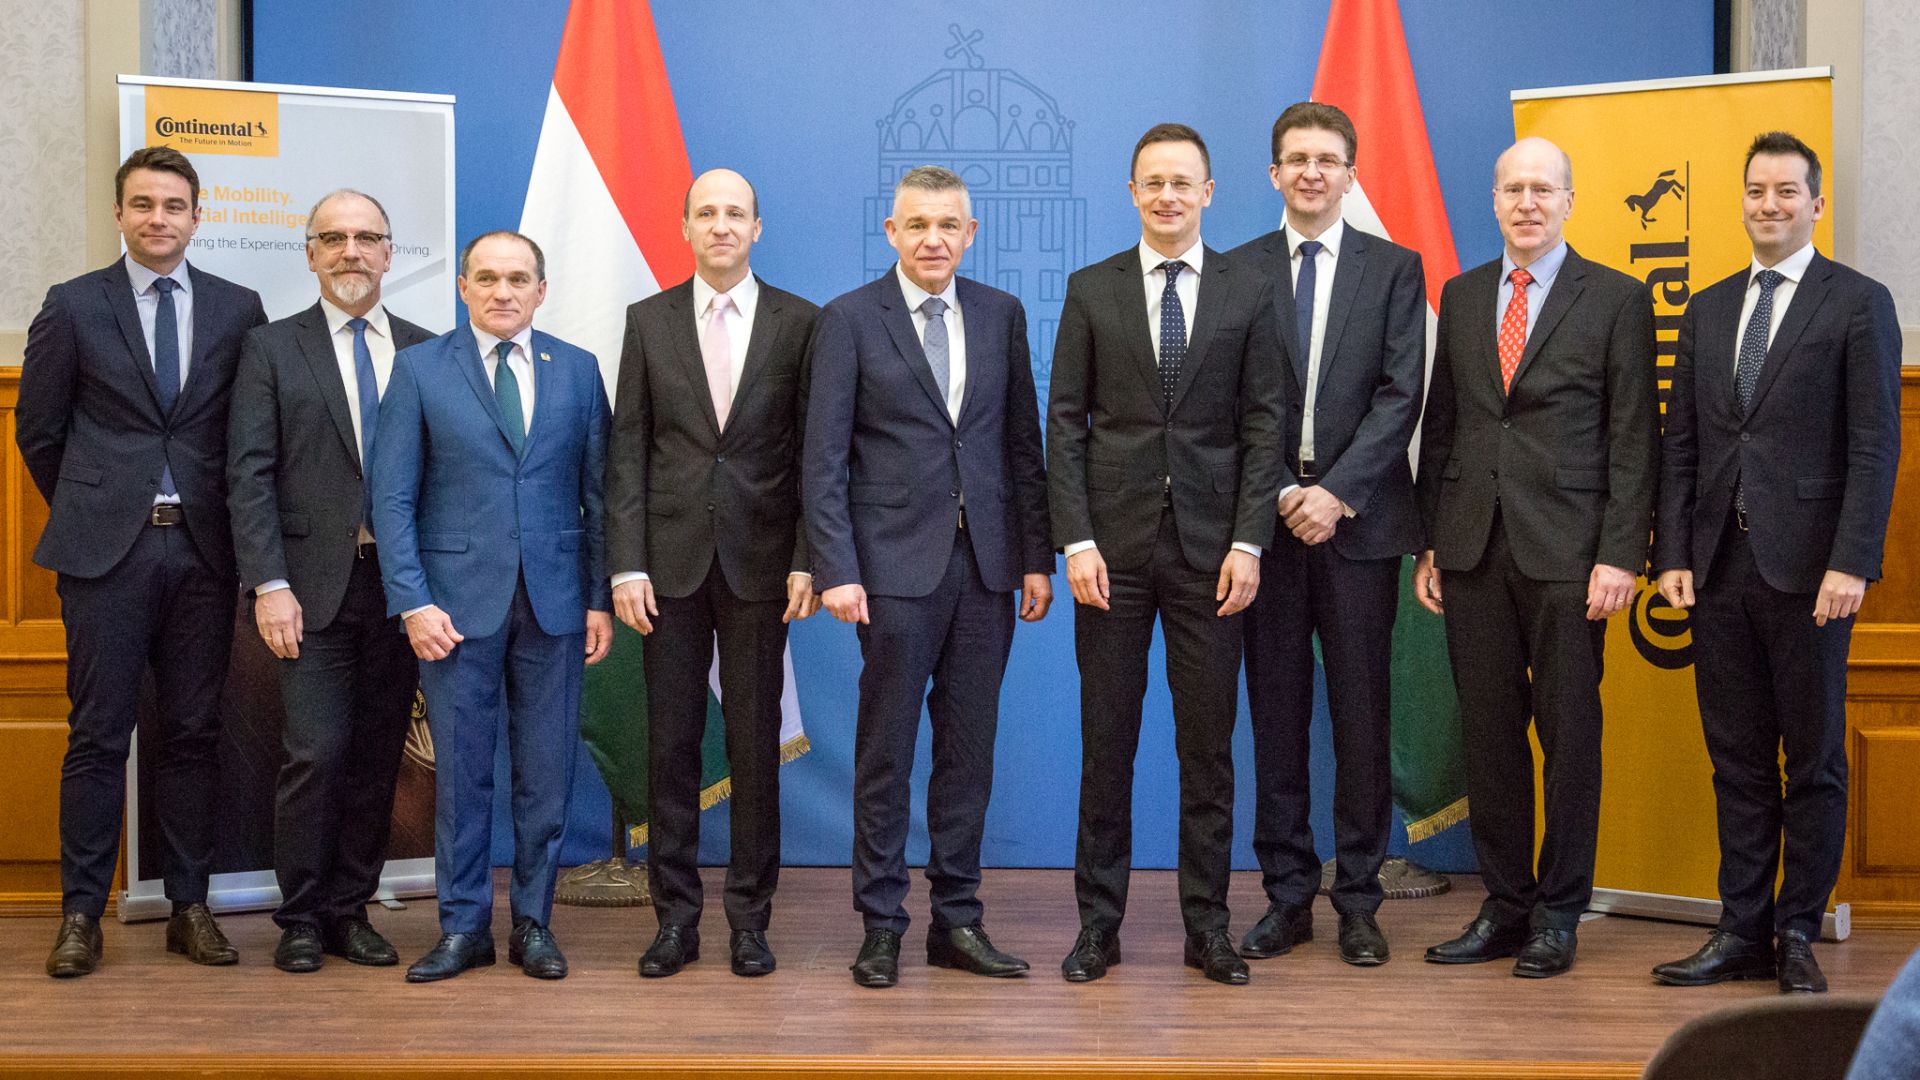 Representatives of the company and the government at the announcement of the project